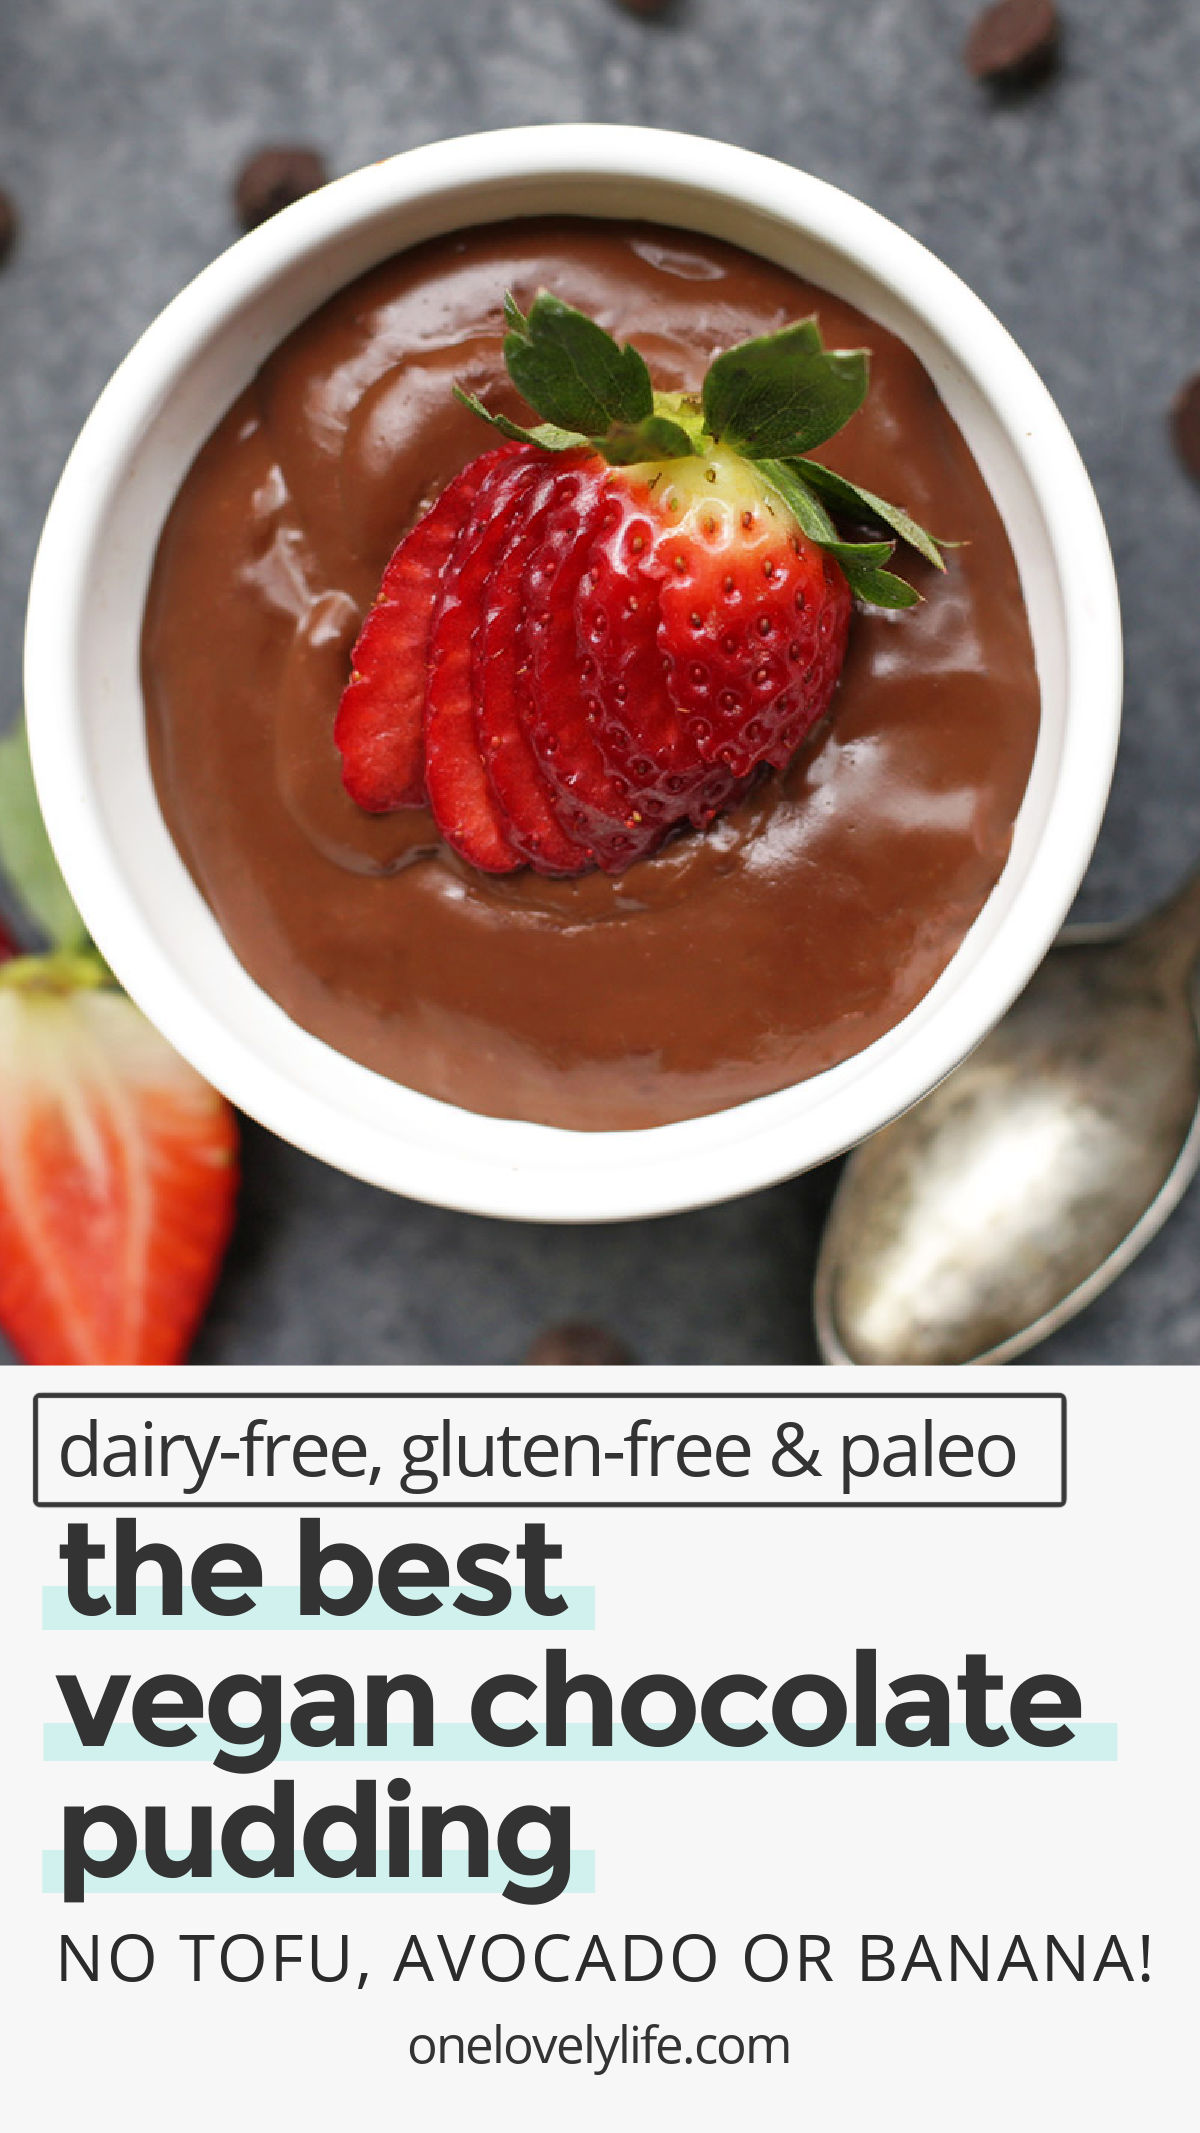 The BEST Vegan Chocolate Pudding - No weird ingredients, this is the real deal. Chocolatey, rich, and silky to boot! (Gluten free & Paleo) // dairy free chocolate pudding // gluten-free chocolate pudding // paleo chocolate pudding // healthy chocolate pudding recipe // vegan chocolate pudding no tofu // vegan chocolate pudding no avocado // vegan Valentine's Day dessert // paleo Valentine's Day dessert